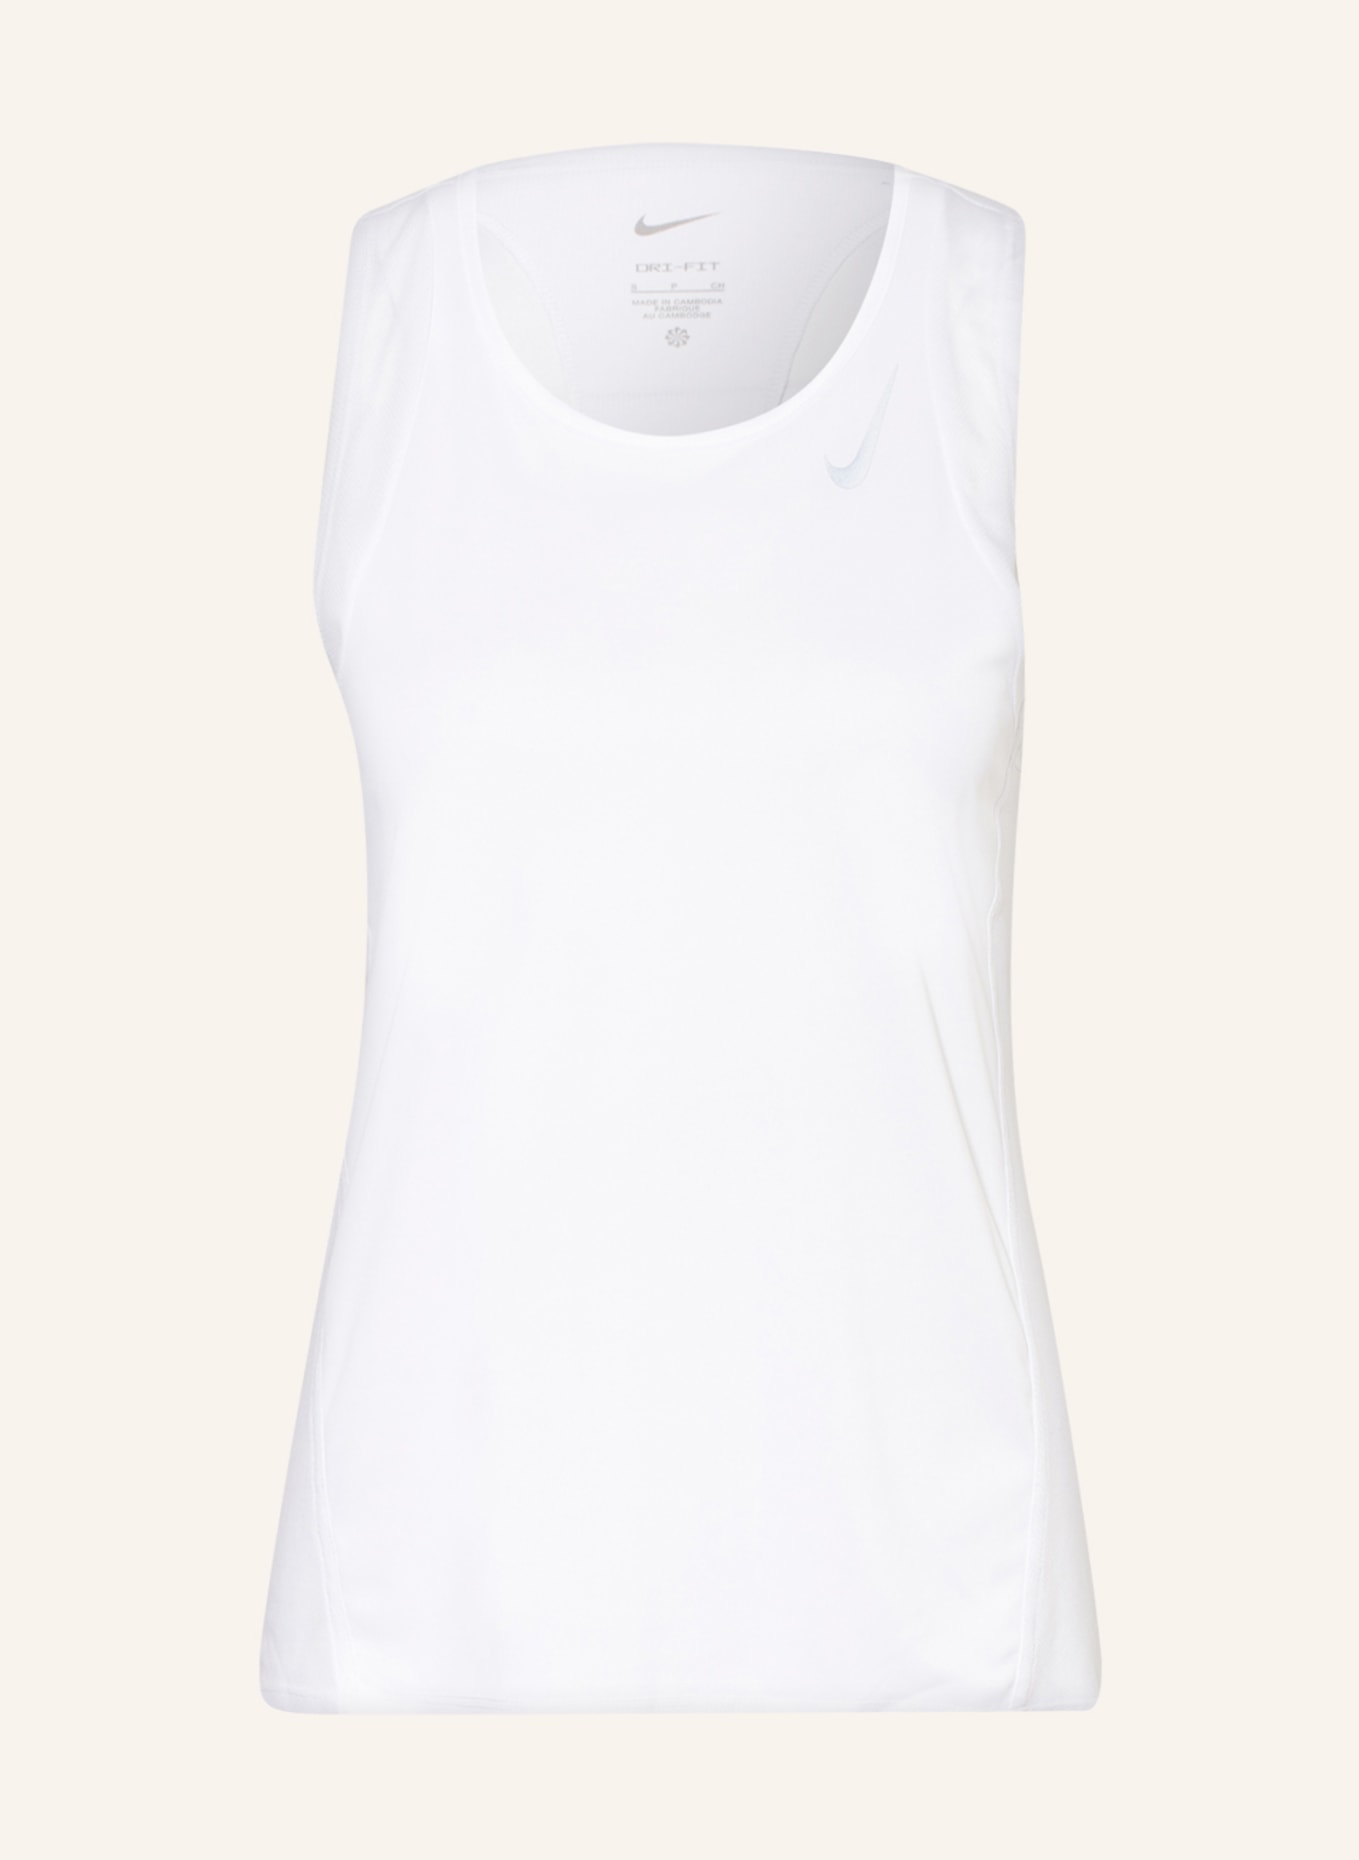 Nike Running top DRI-FIT RACE with mesh, Color: WHITE (Image 1)